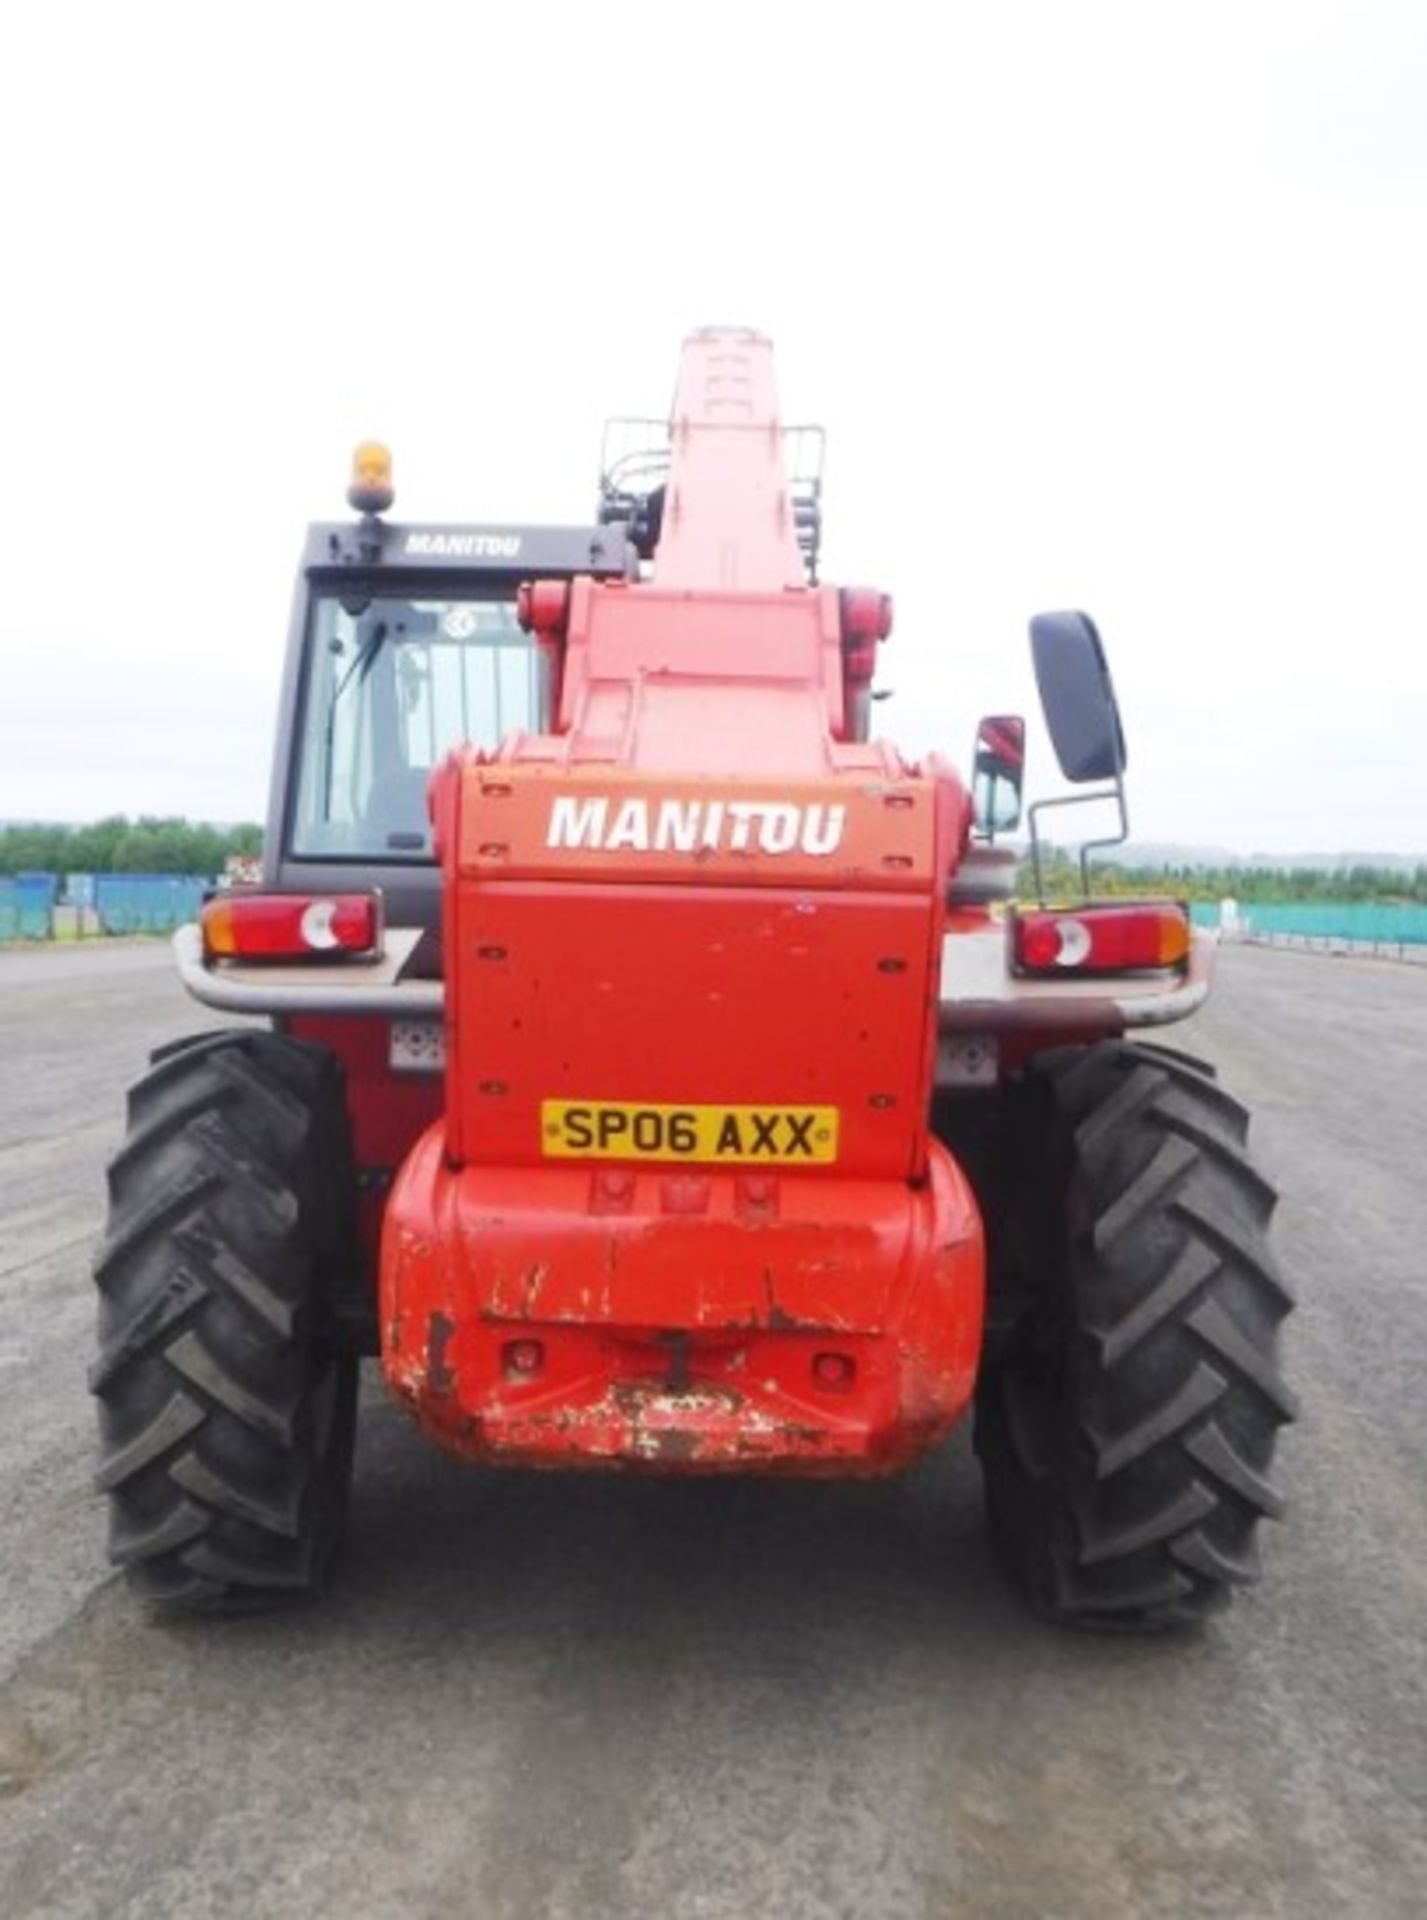 2006 MANITOU 14/35 TELEHANDLER c/w bucket & forks s/n 1230044 Reg no SP06 AXX 2646hrs (not verified) - Image 18 of 31